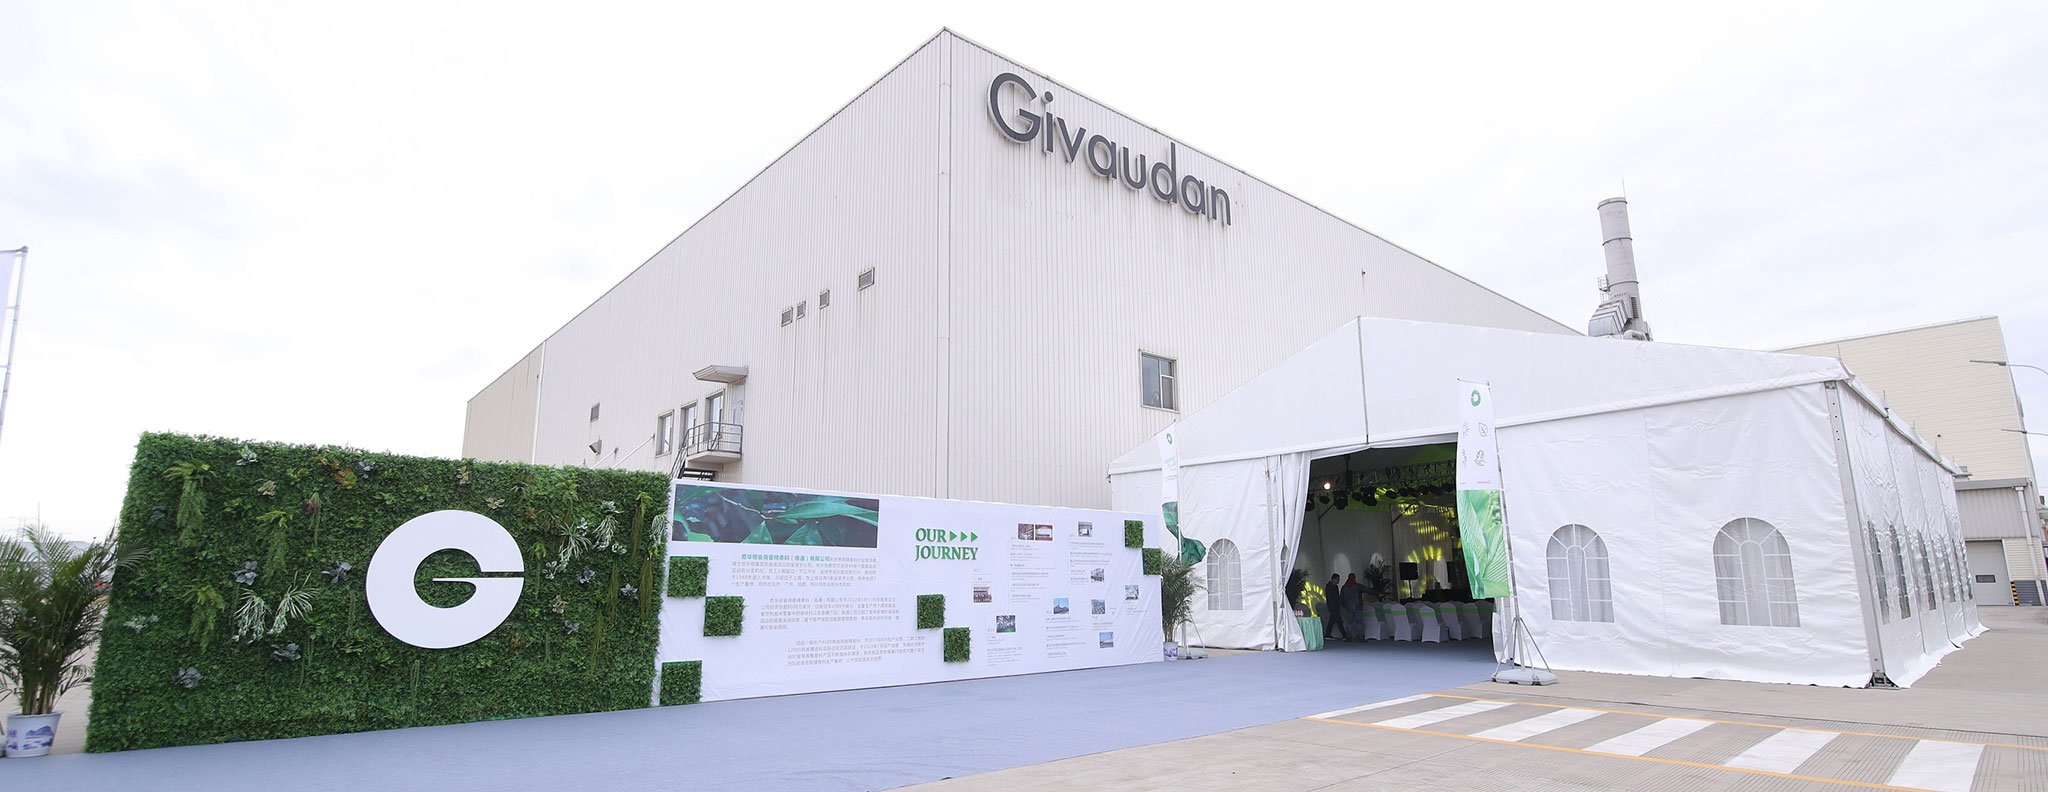 Givaudan doubles flavour production capacity in China with expansion of Nantong manufacturing facility